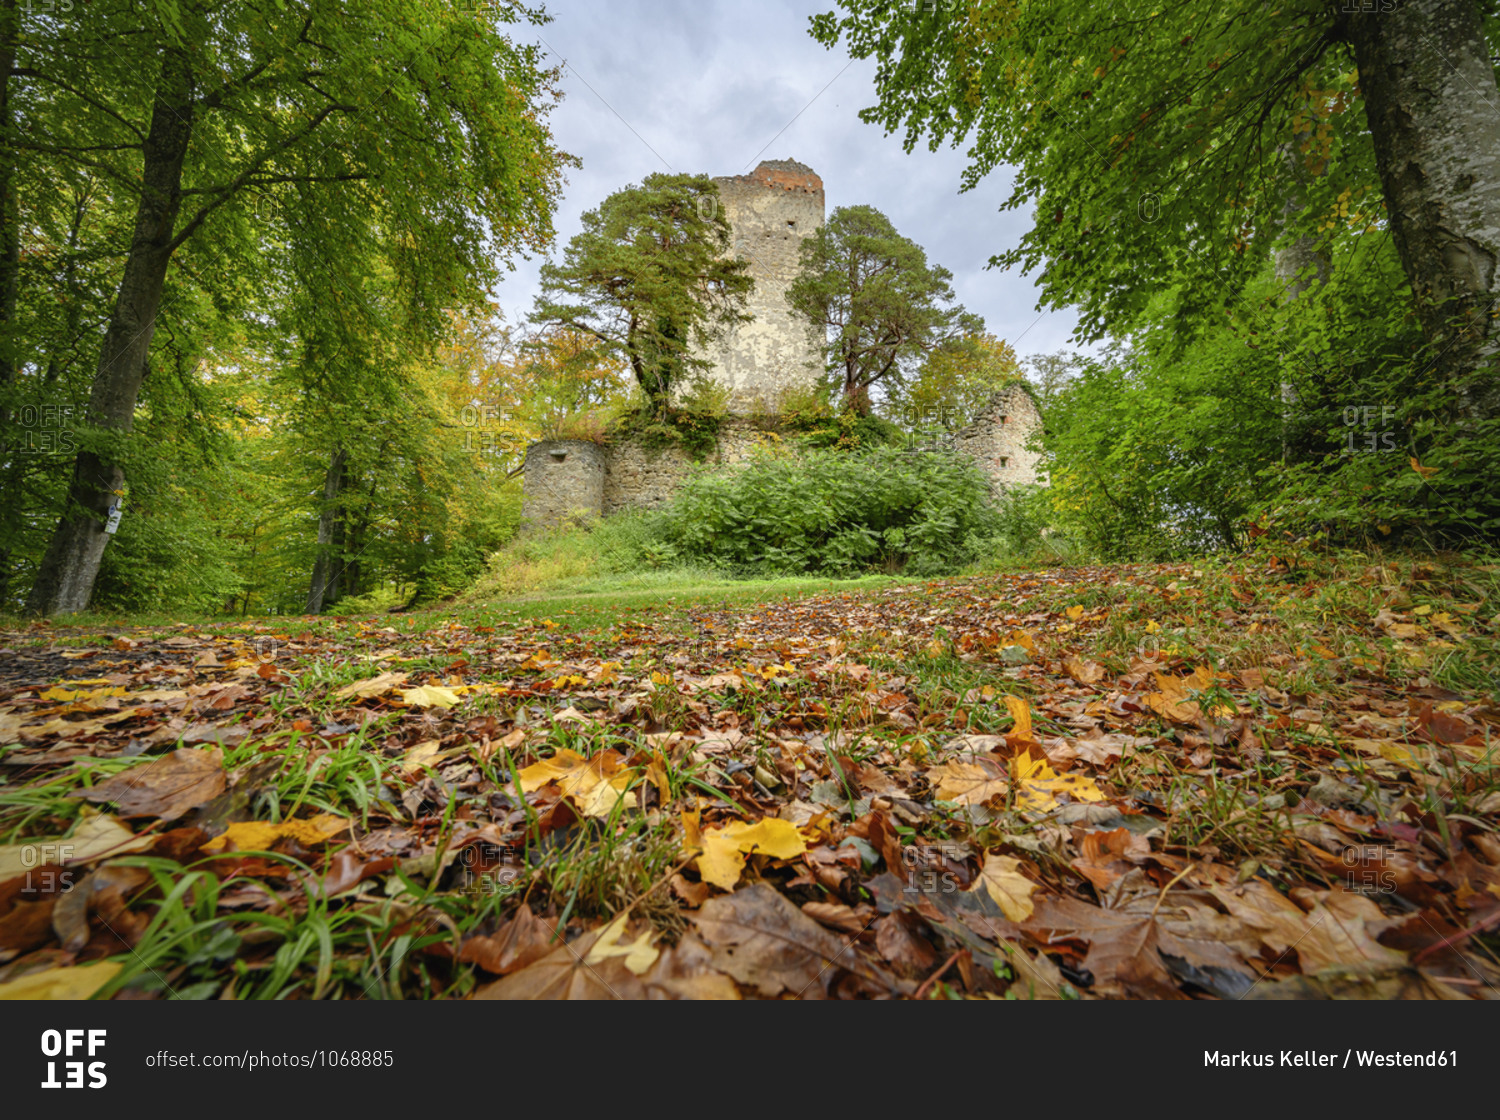 Germany- Baden-Wurttemberg- Bodman-Ludwigshafen- Fallen leaves lying on ground in autumn with ruins of Burg Altbodman standing in background